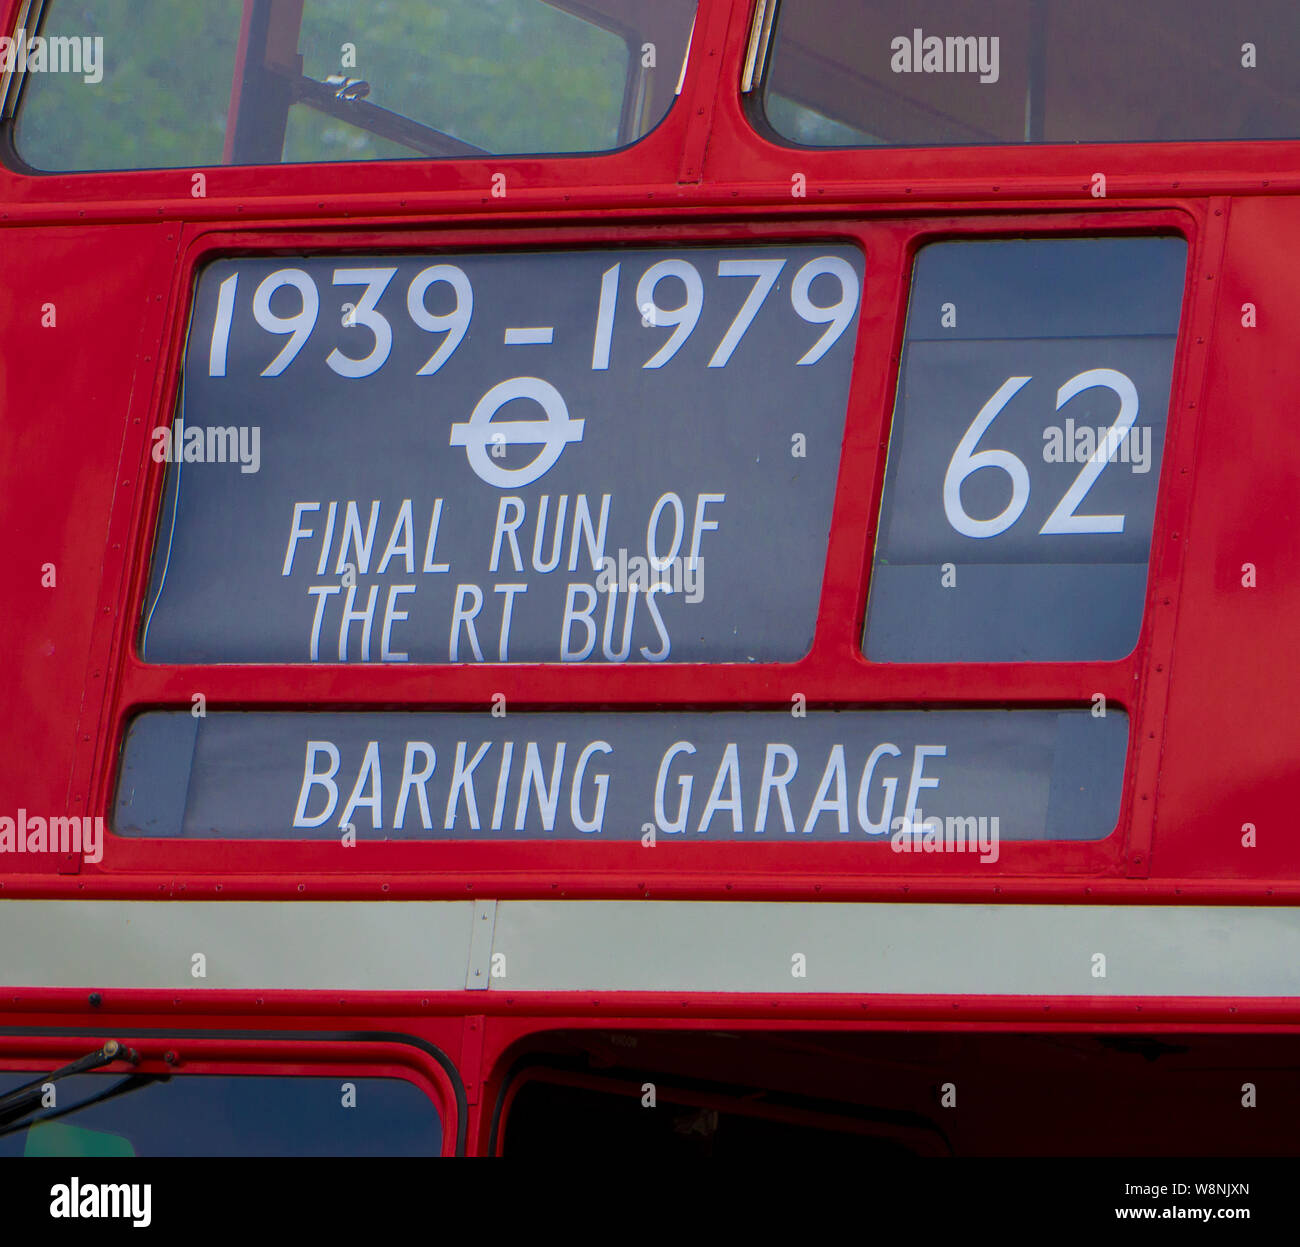 Destination blind for the final run of the iconic London RT Bus The very last RT in service, operated on route 62 from Barking Garage on 7 April 1979. Stock Photo